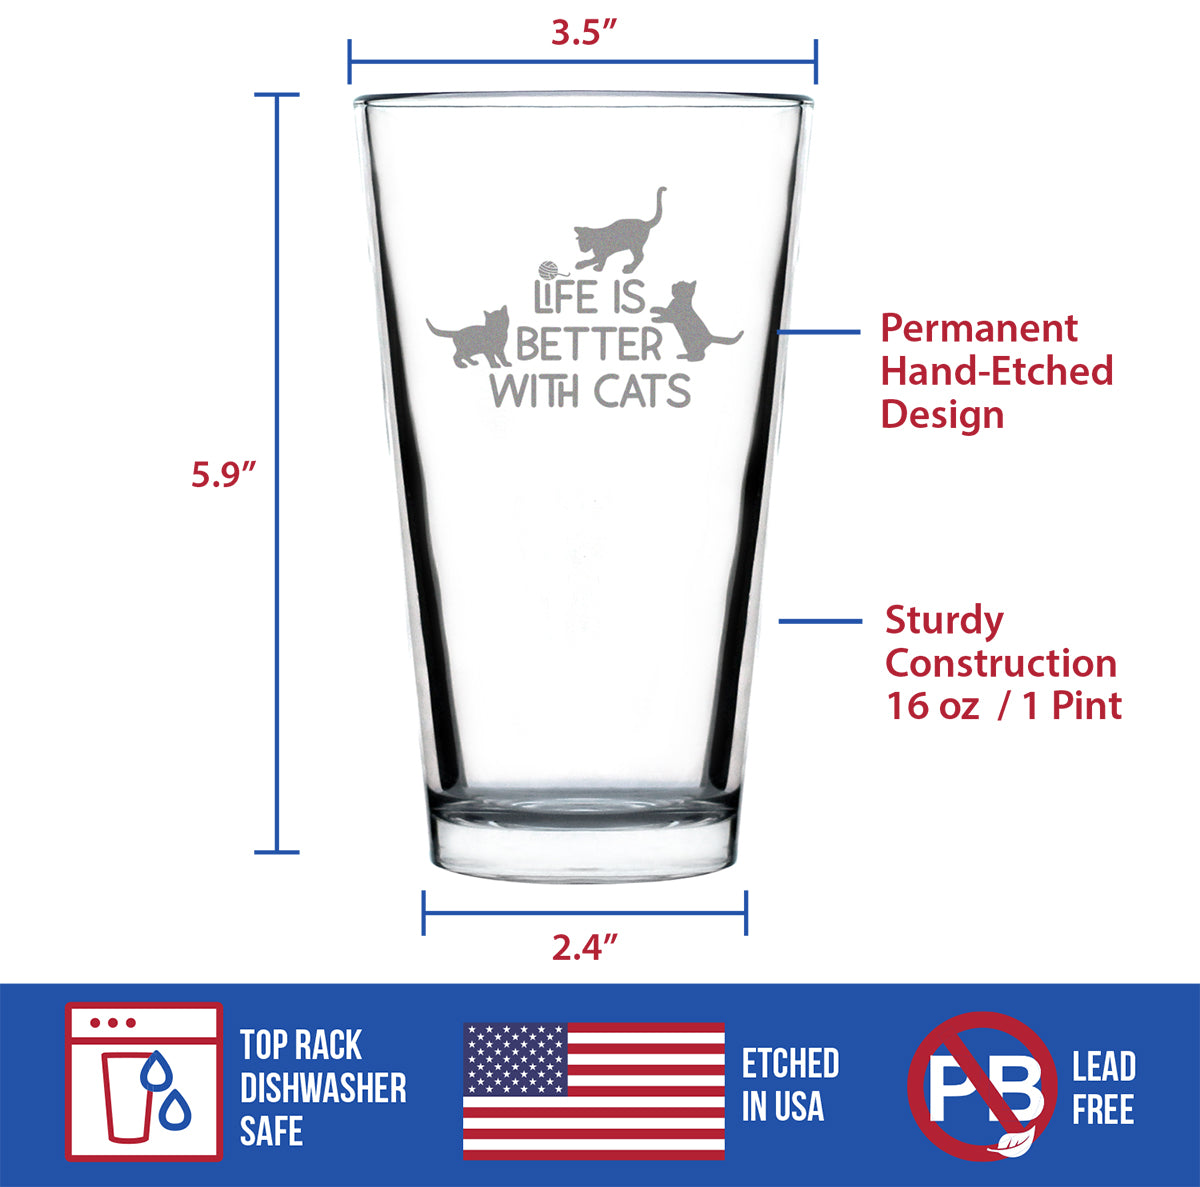 Life is Better With Cats - Funny Cat Pint Glass Gifts for Beer Drinking Men &amp; Women - Fun Unique Kitty Decor